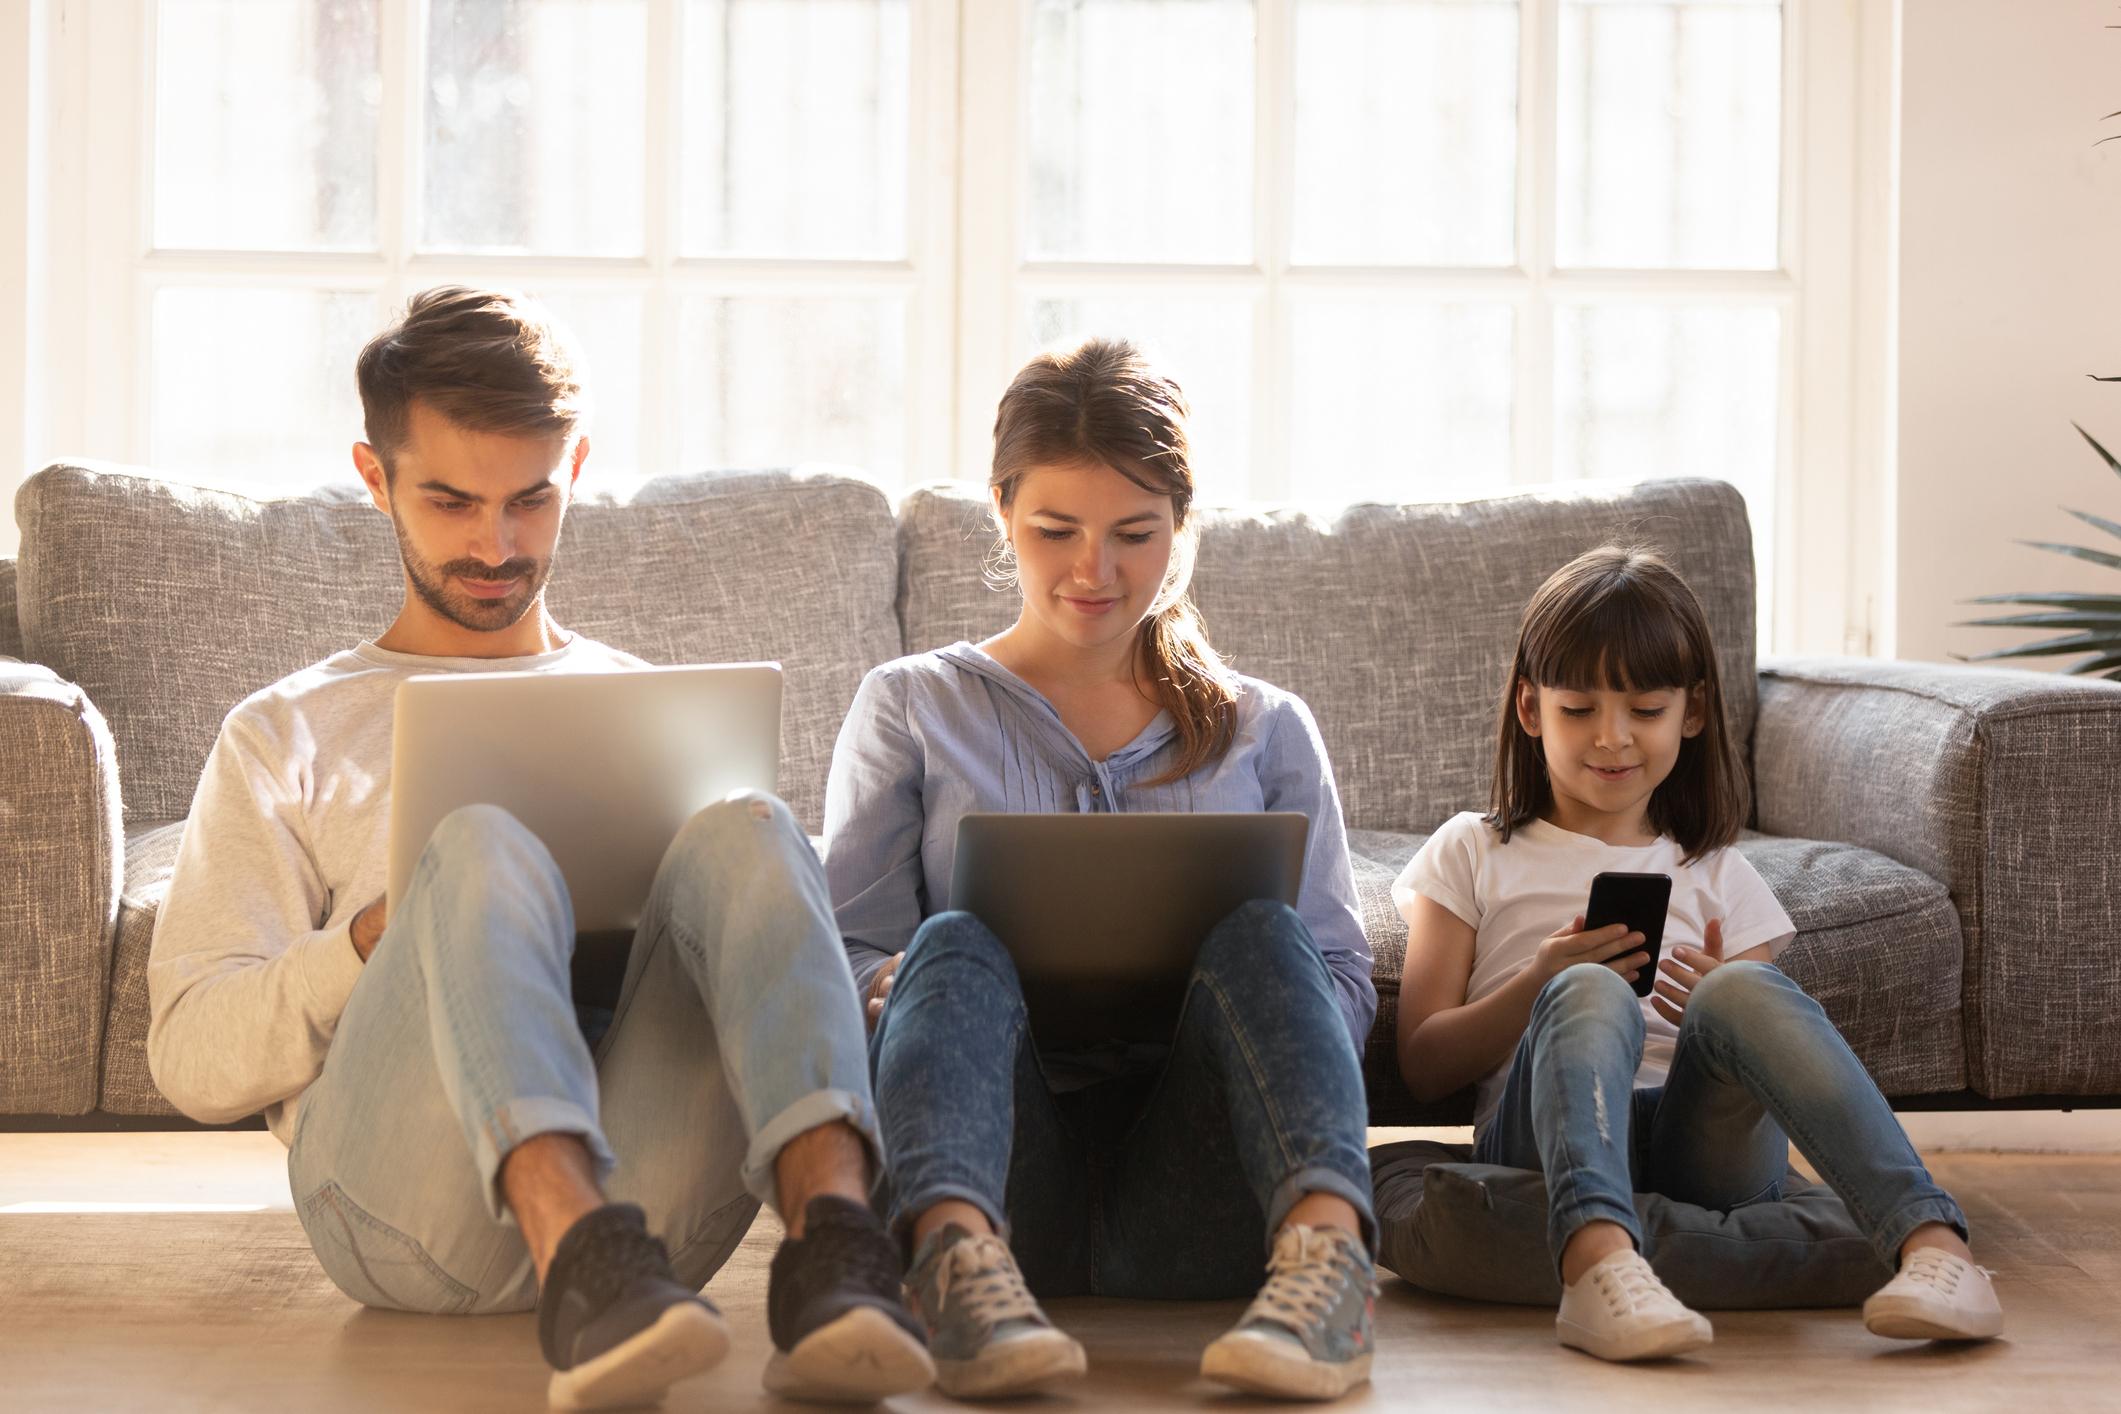 Trend Micro’s Top 5 Digital Healthy Habits for Families in 2023